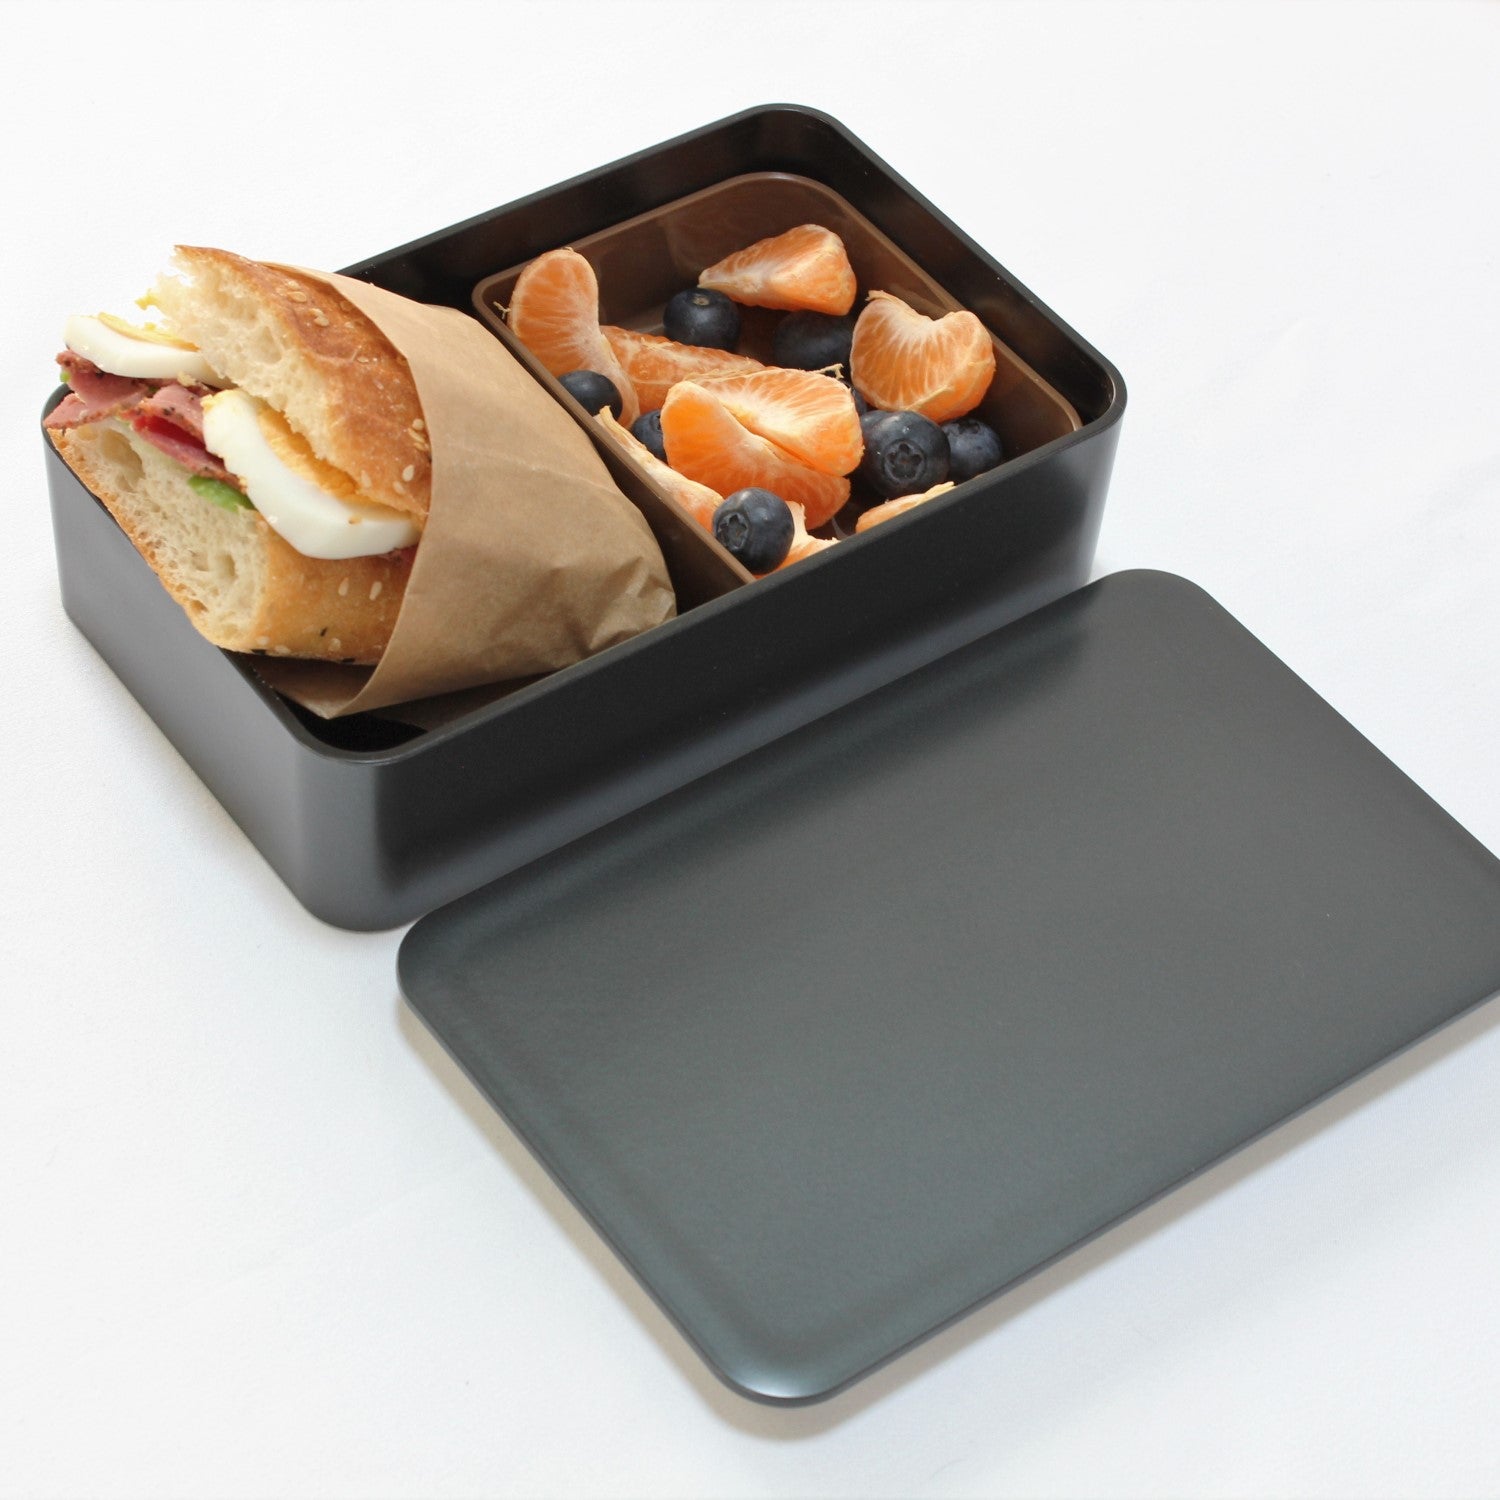 Majime Life Kuro 1 Tier Bento Box Japanese Bento Boxes for Adults Made in Japan Simple functional Bento Lunch boxes Microwave and Dishwasher safe black sleek design baguette fruits lunch box